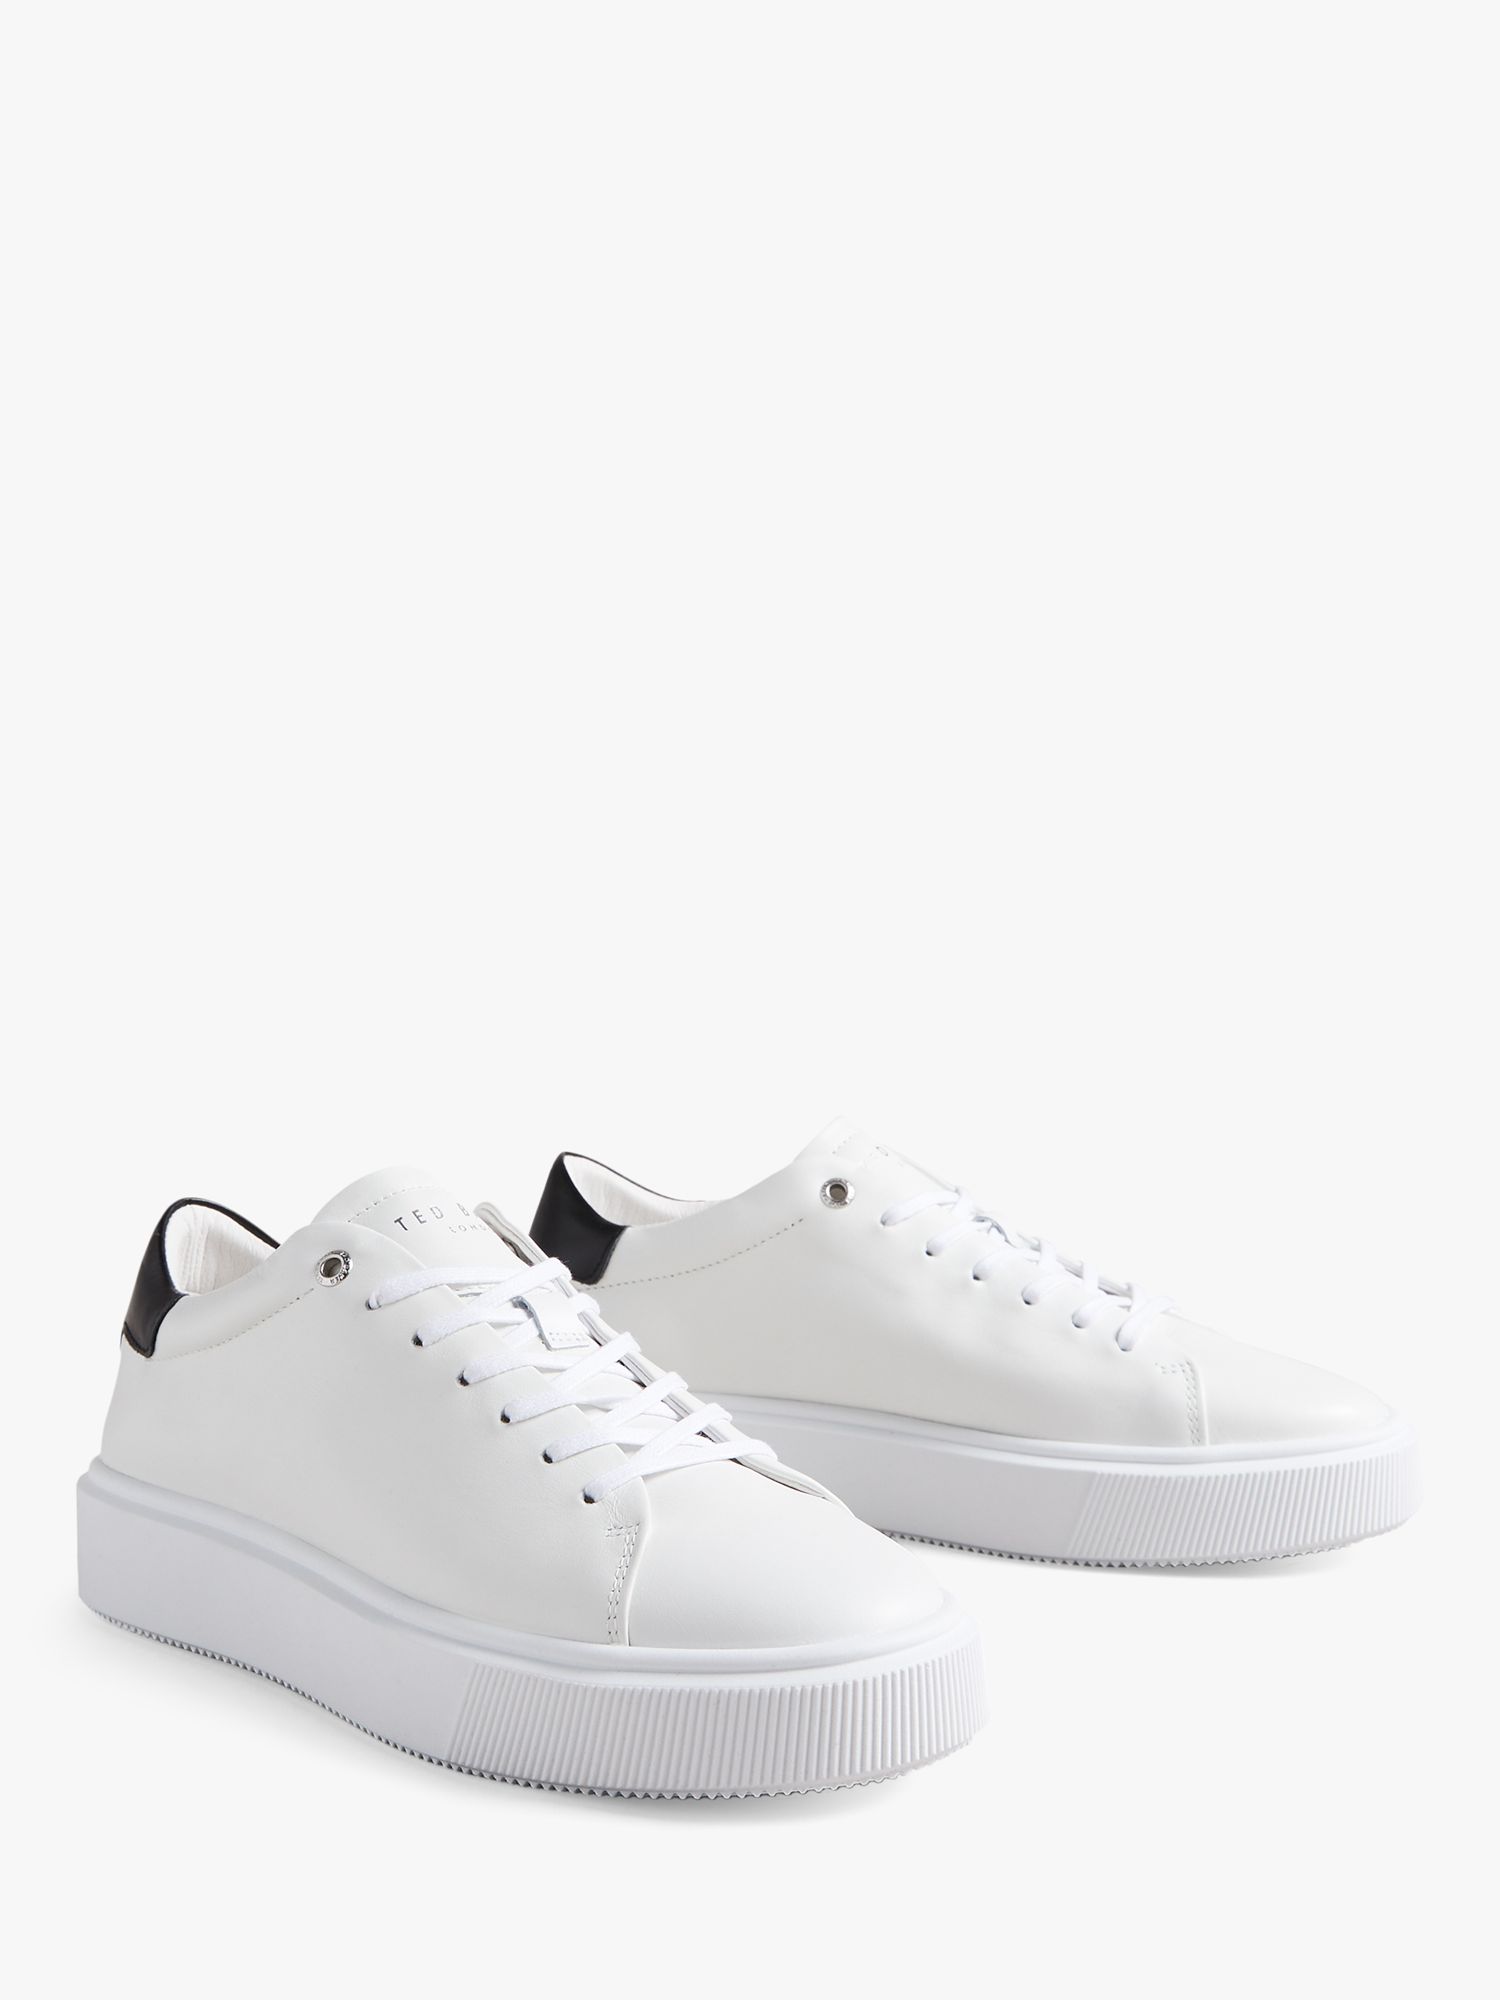 Ted Baker Lornea Leather Chunky Trainers, White at John Lewis & Partners